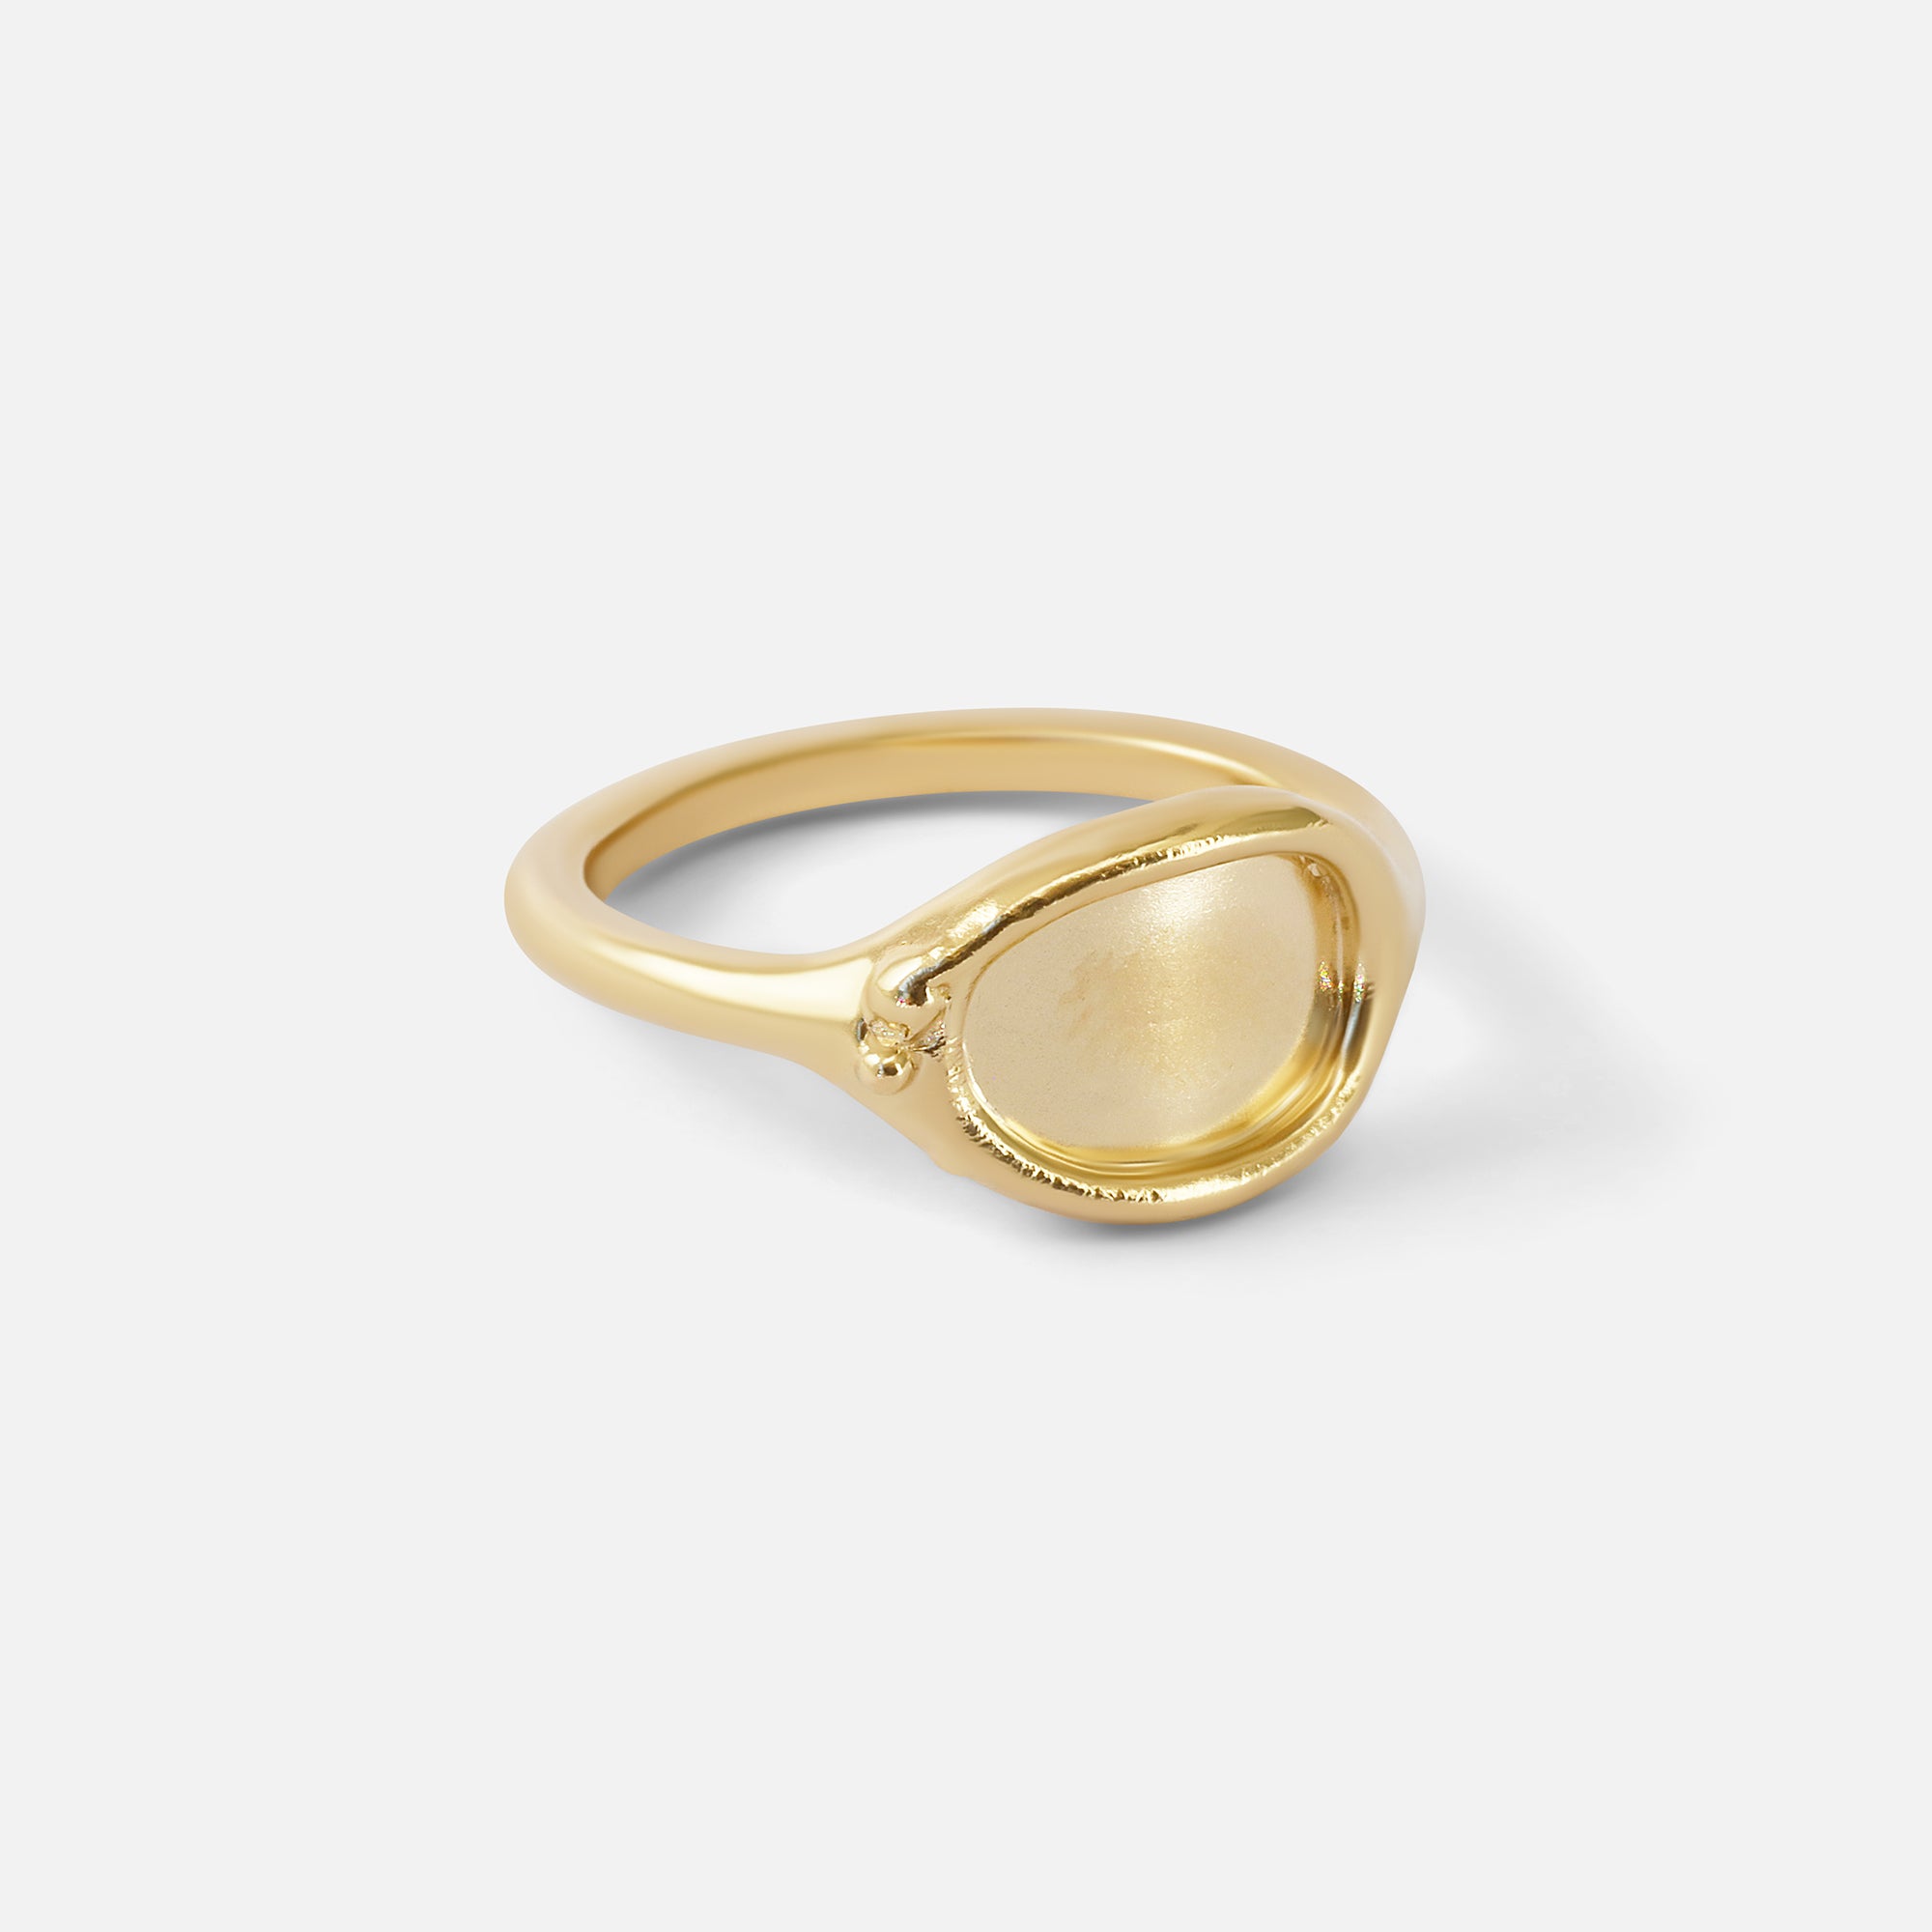 Reflection / III Ring By Alfonzo in rings Category